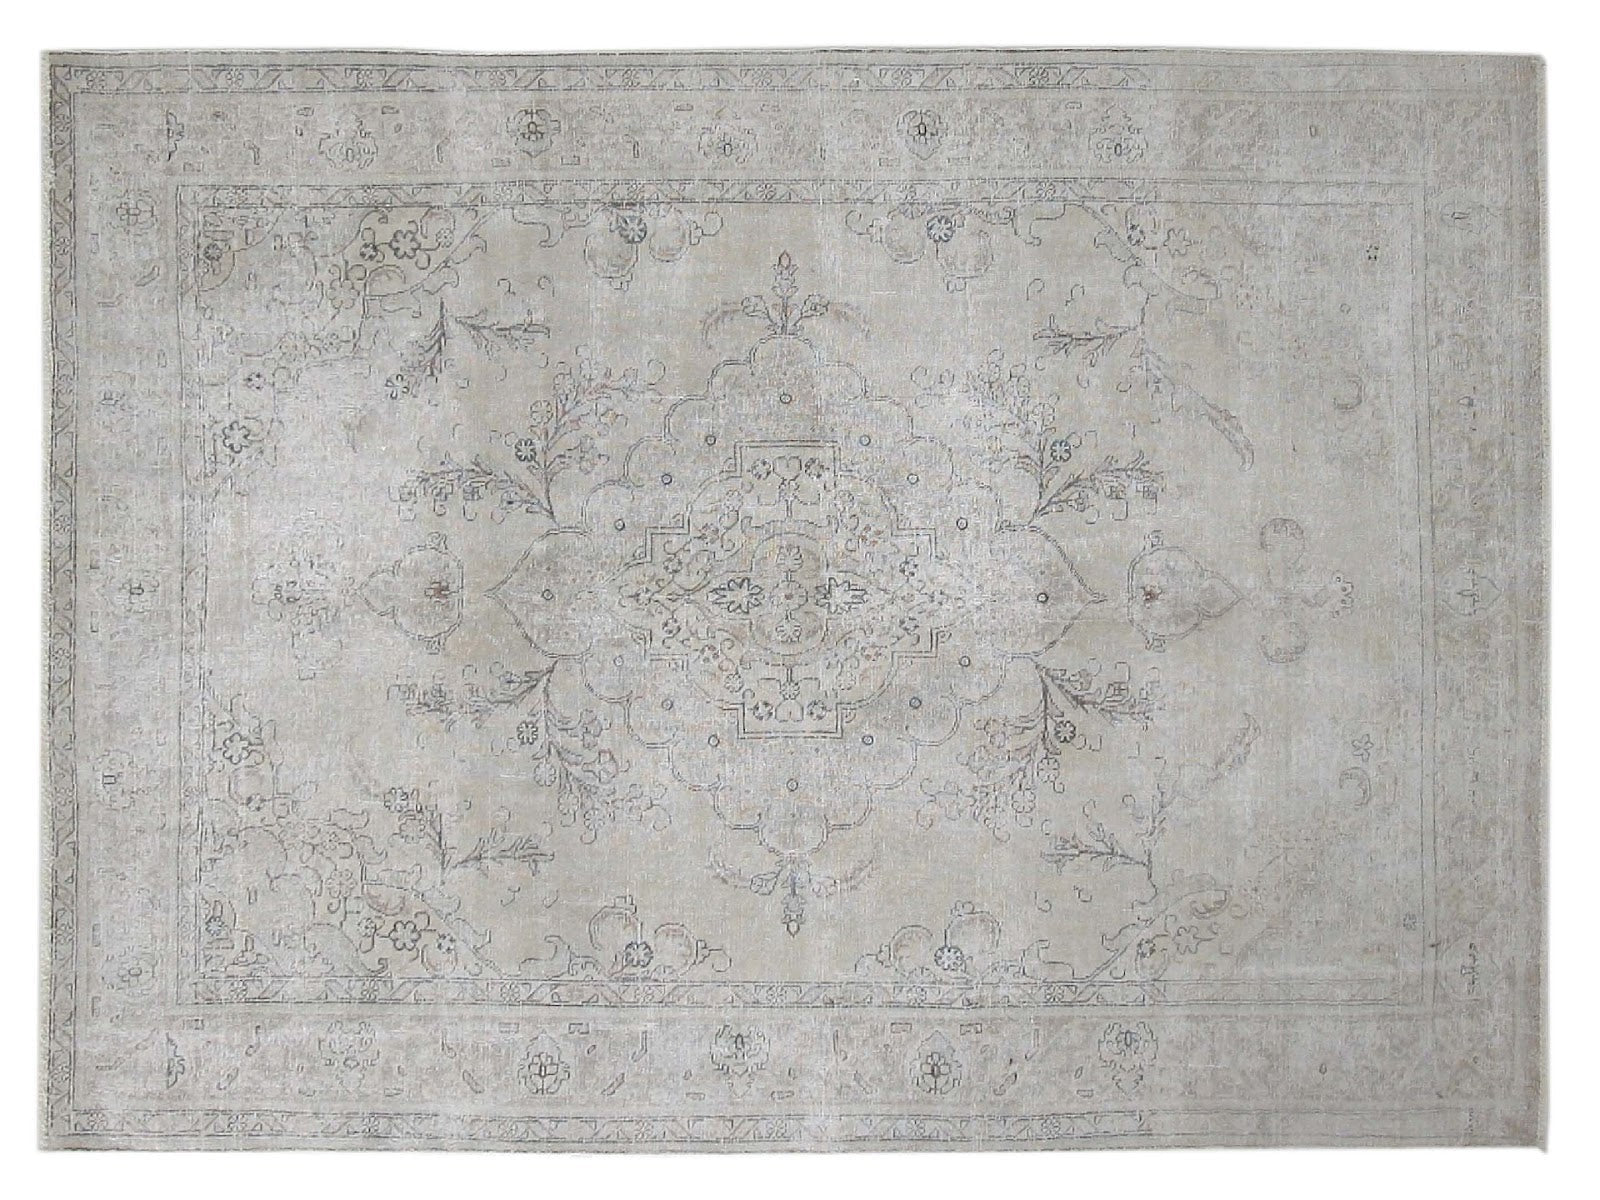 8x10 vintage Persian rug with faded neutral colors and traditional design, hand-knotted in Persia.